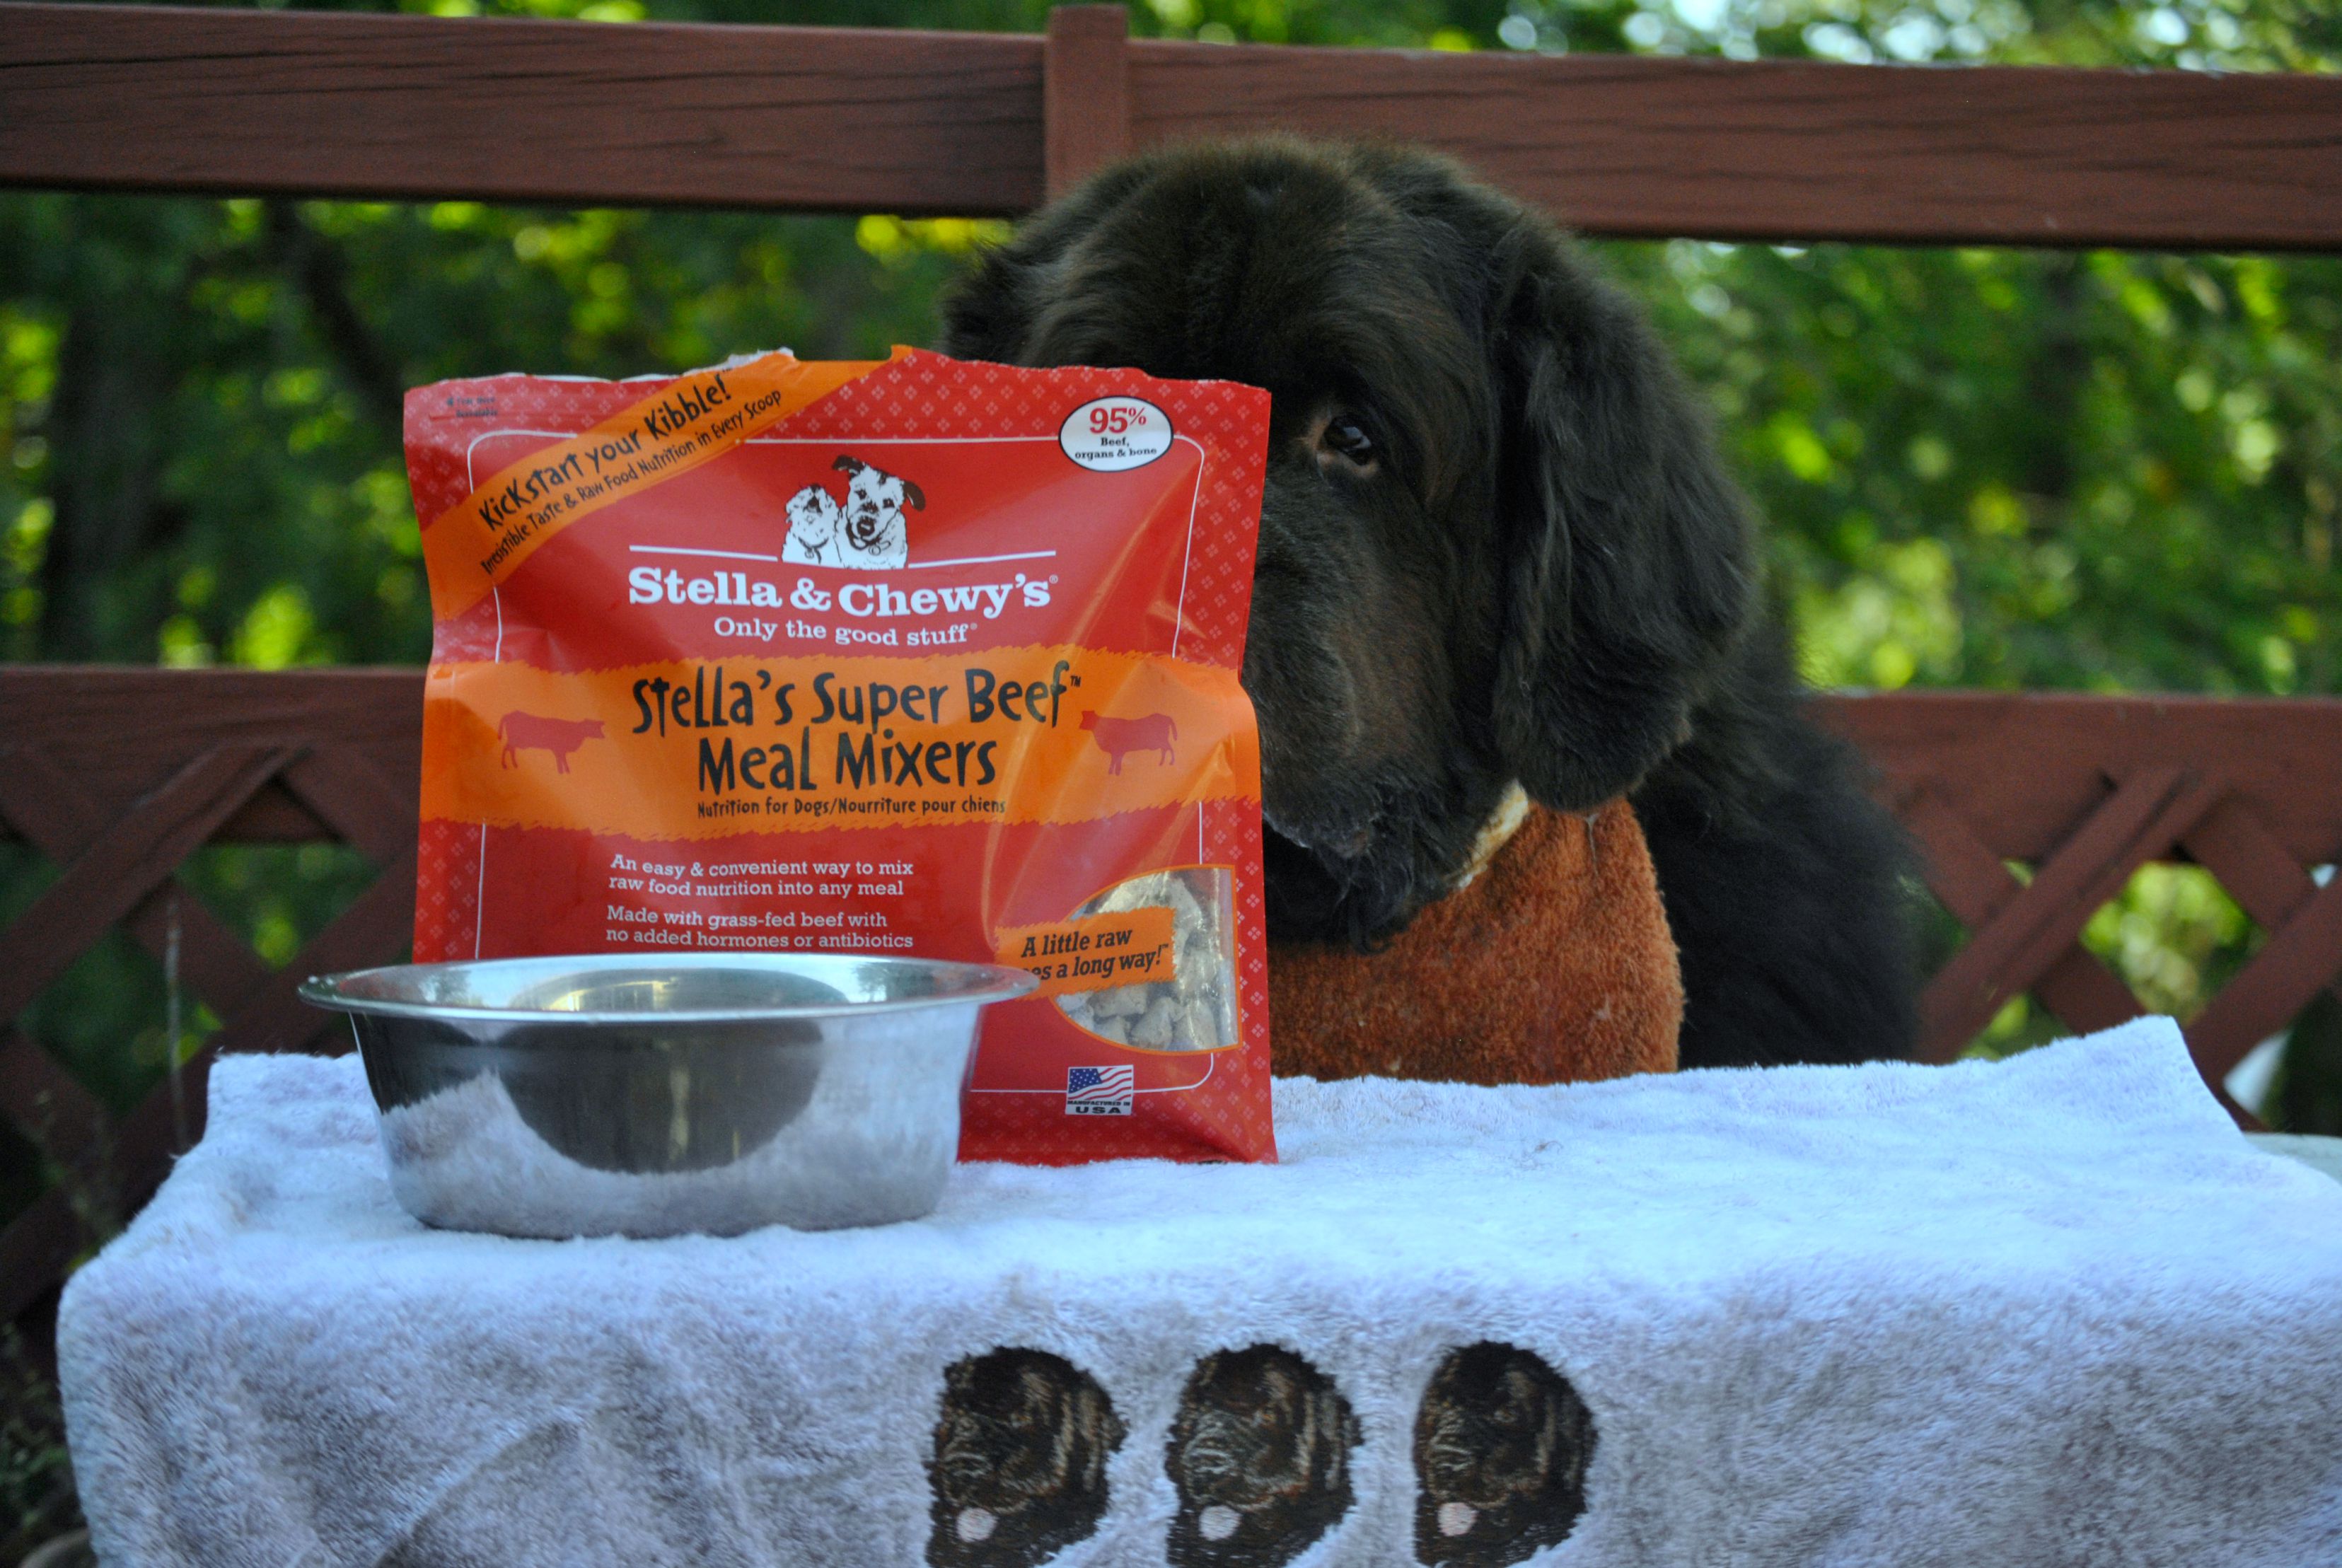 Dog Dining 101 With Stella & Chewy's Raw Pet Food Meal Mixers. 